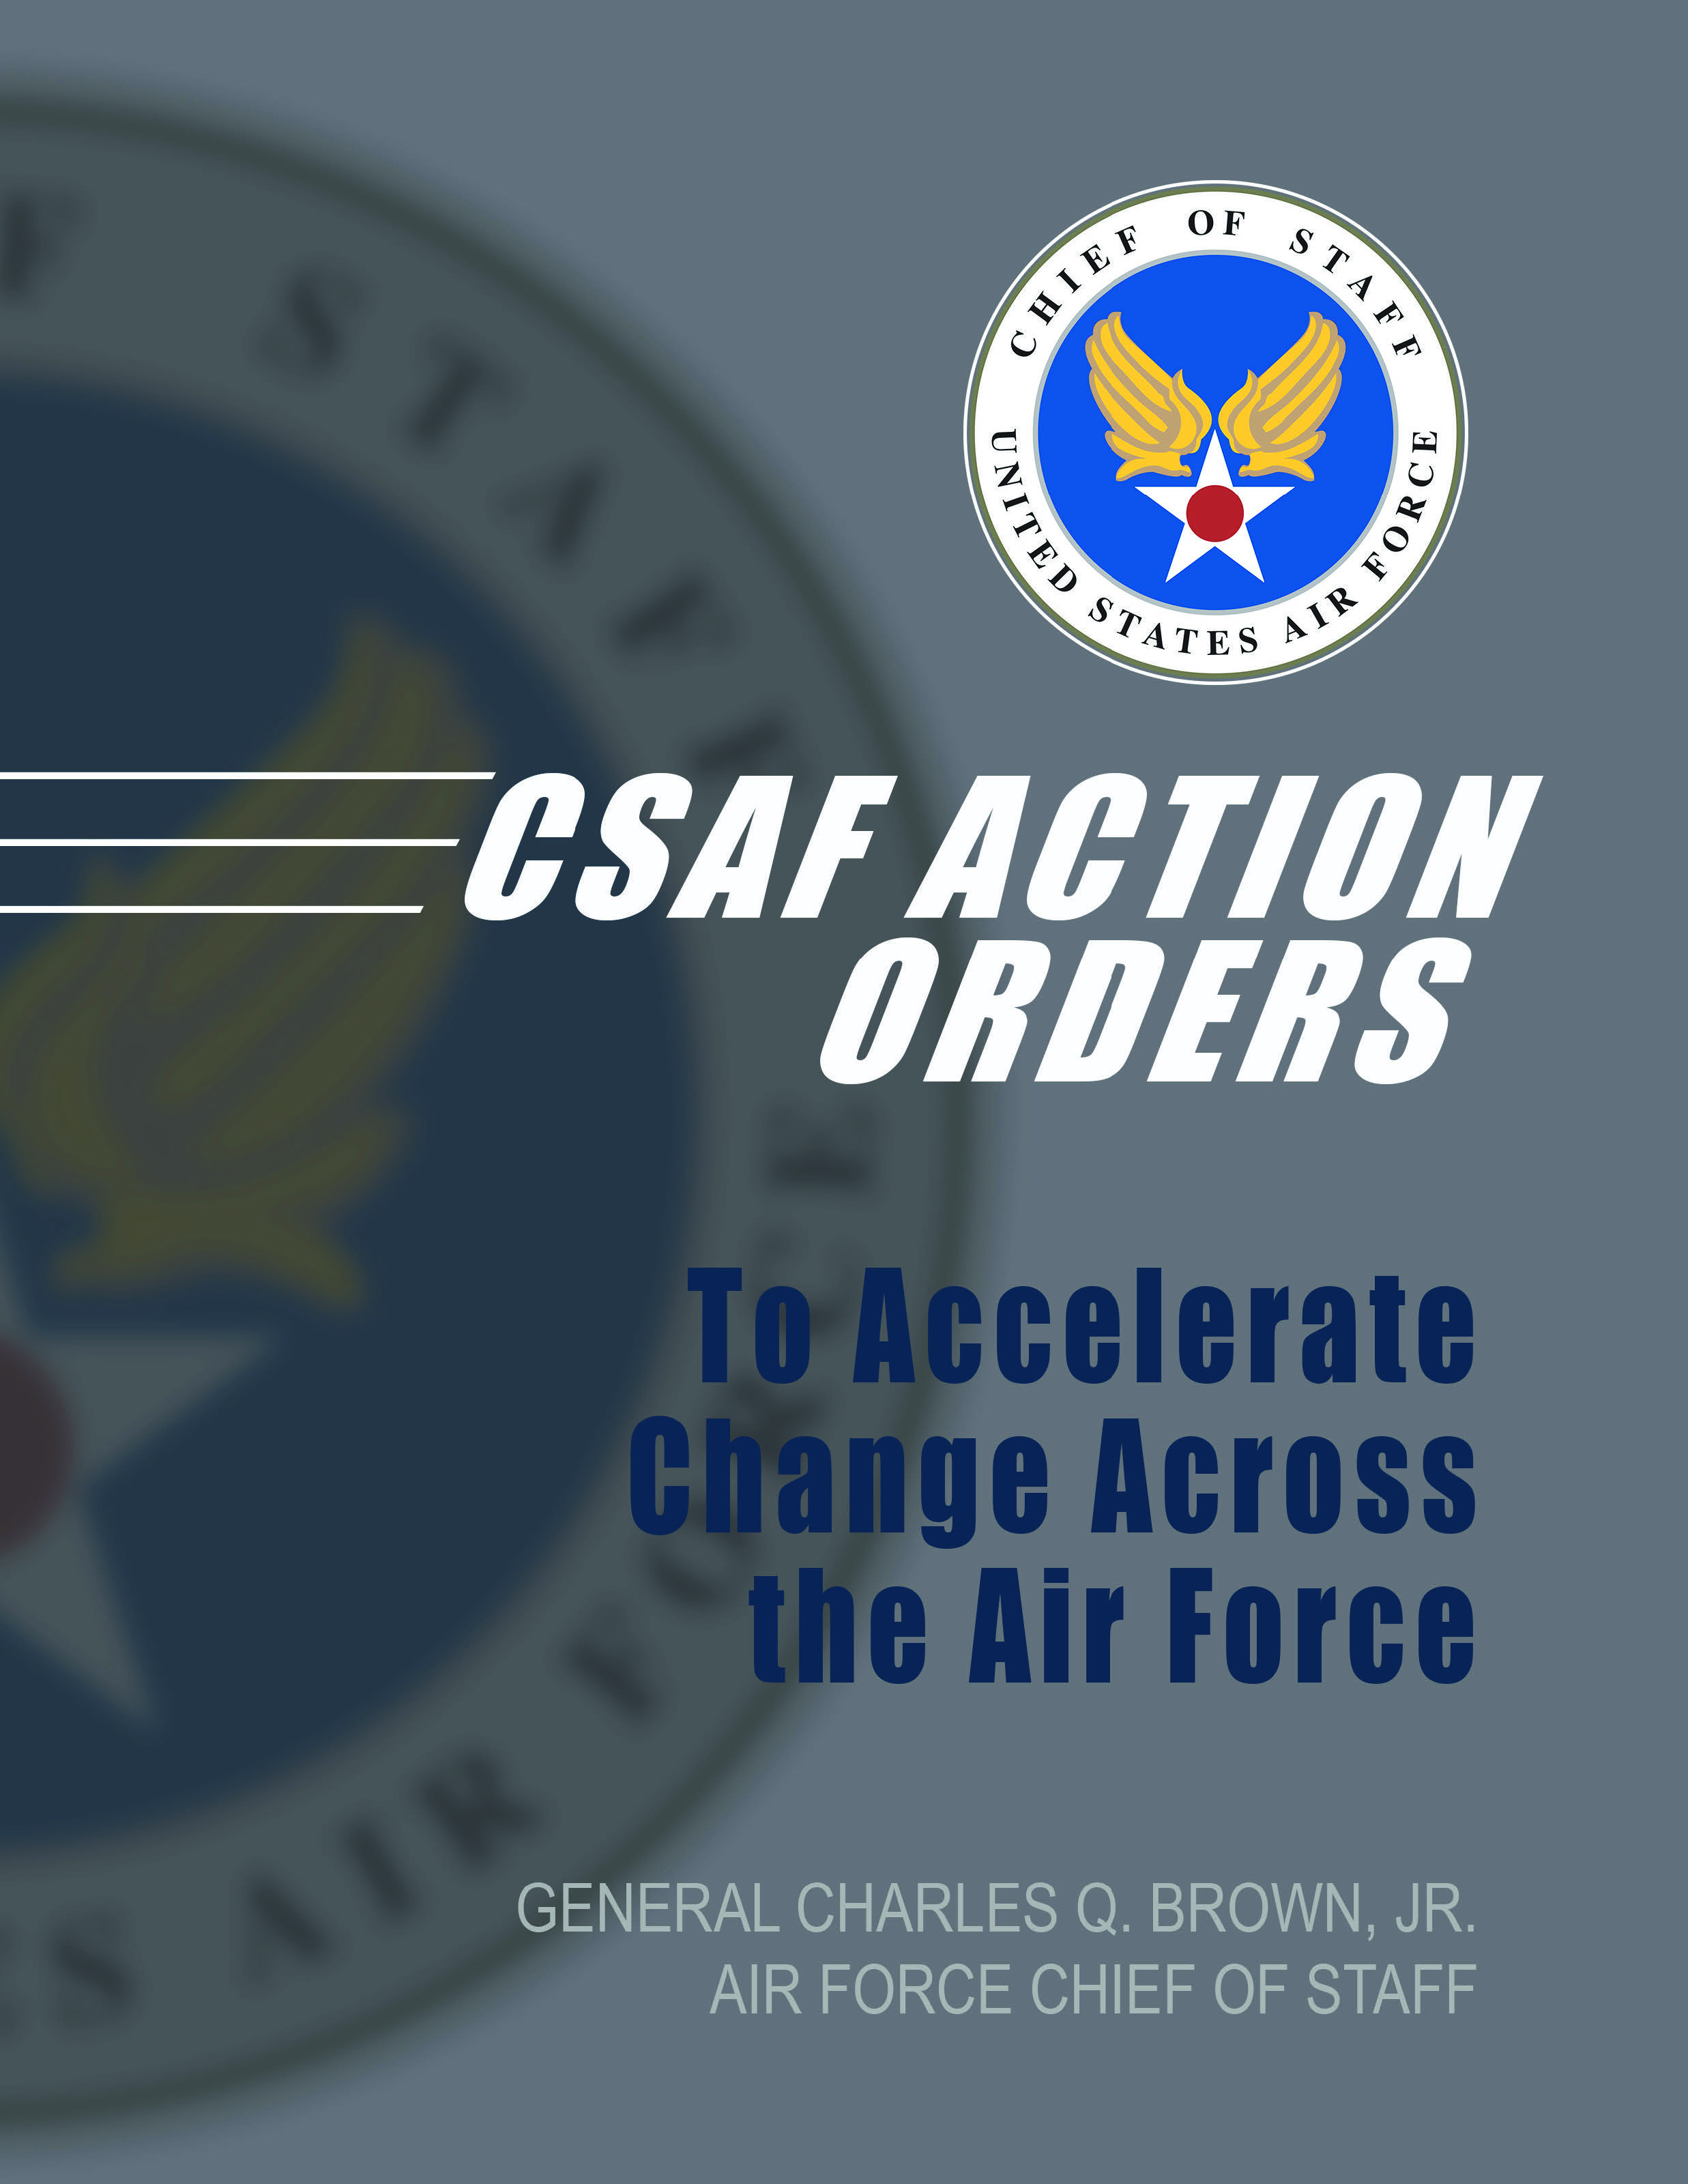 CSAF Action Orders to Accelerate Change Across the Air Force